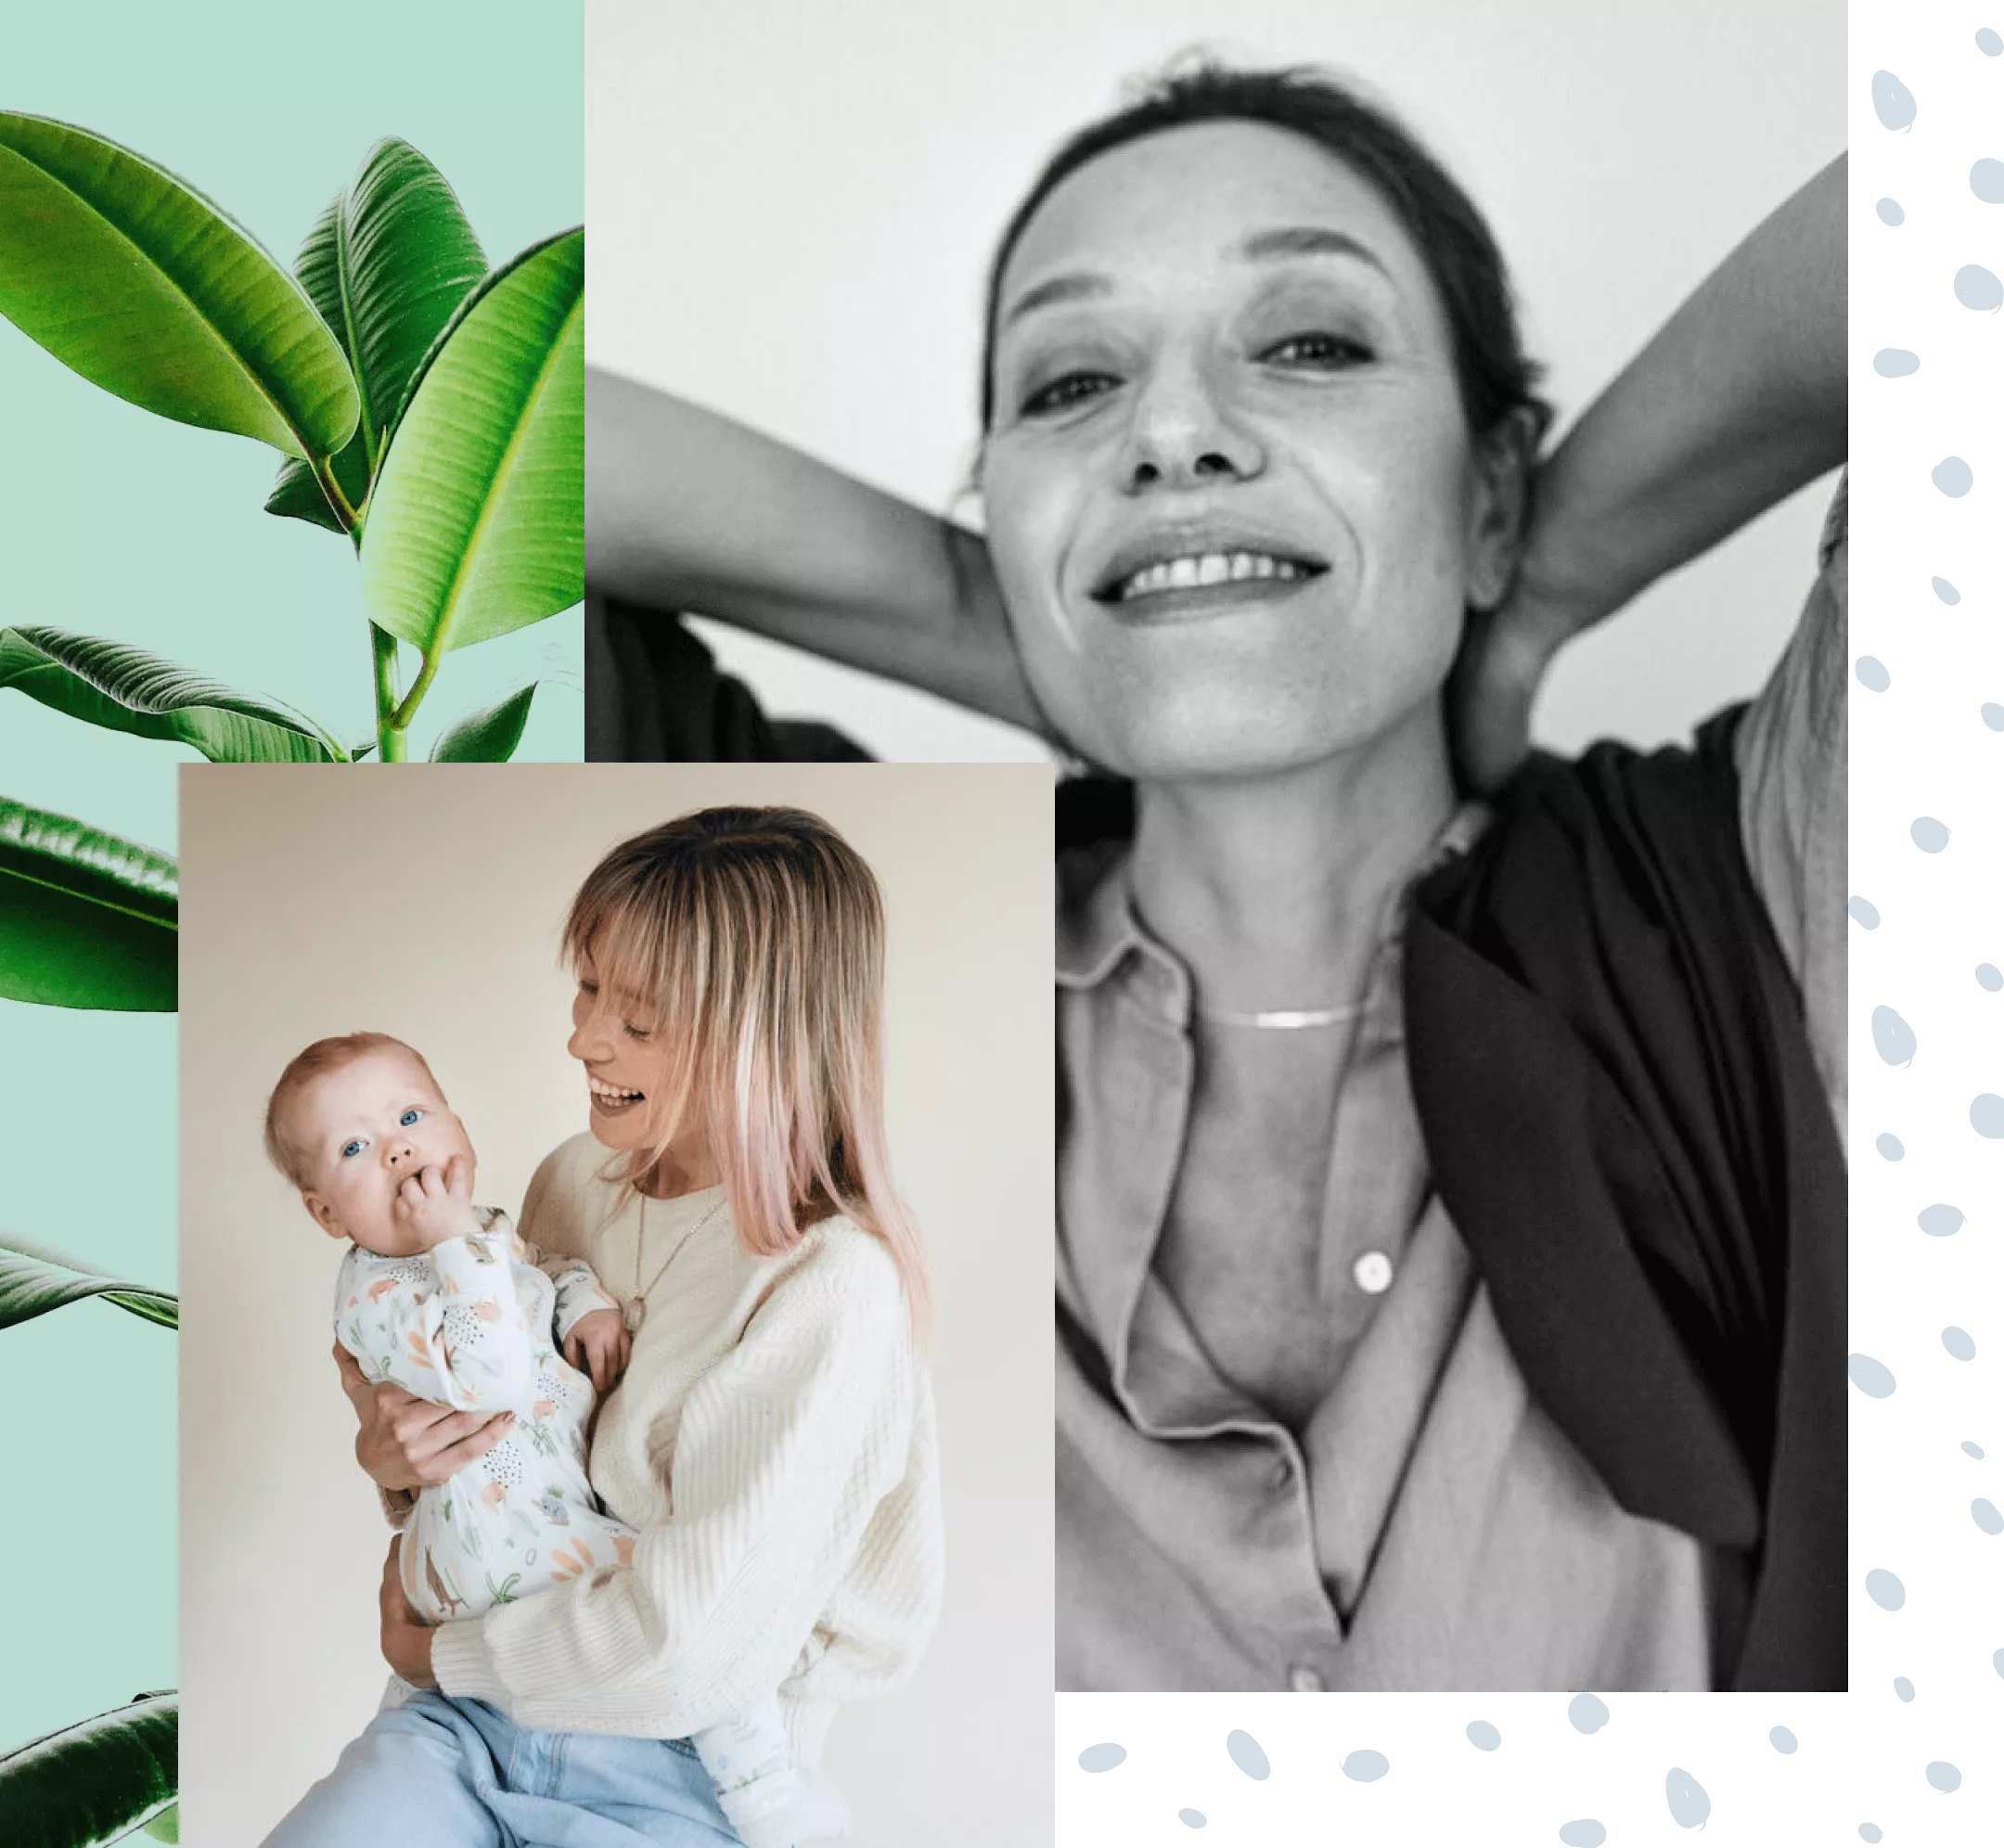 Woman smiling, mother and baby, plant